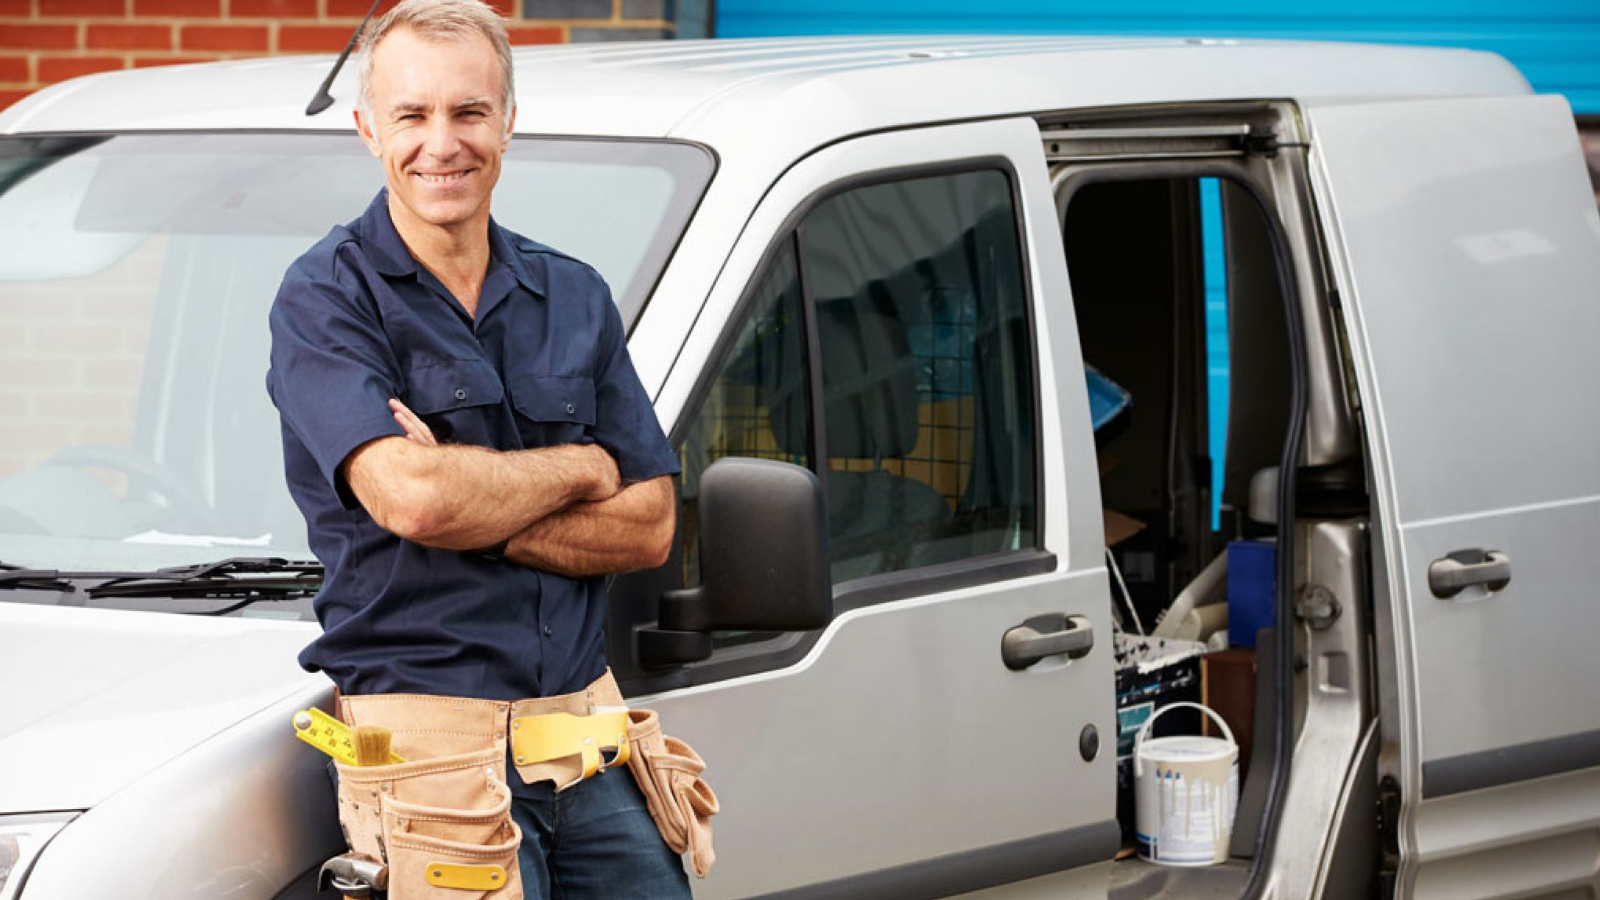 skilled plumber stands next to his van, ready to take any any new jobs from their website